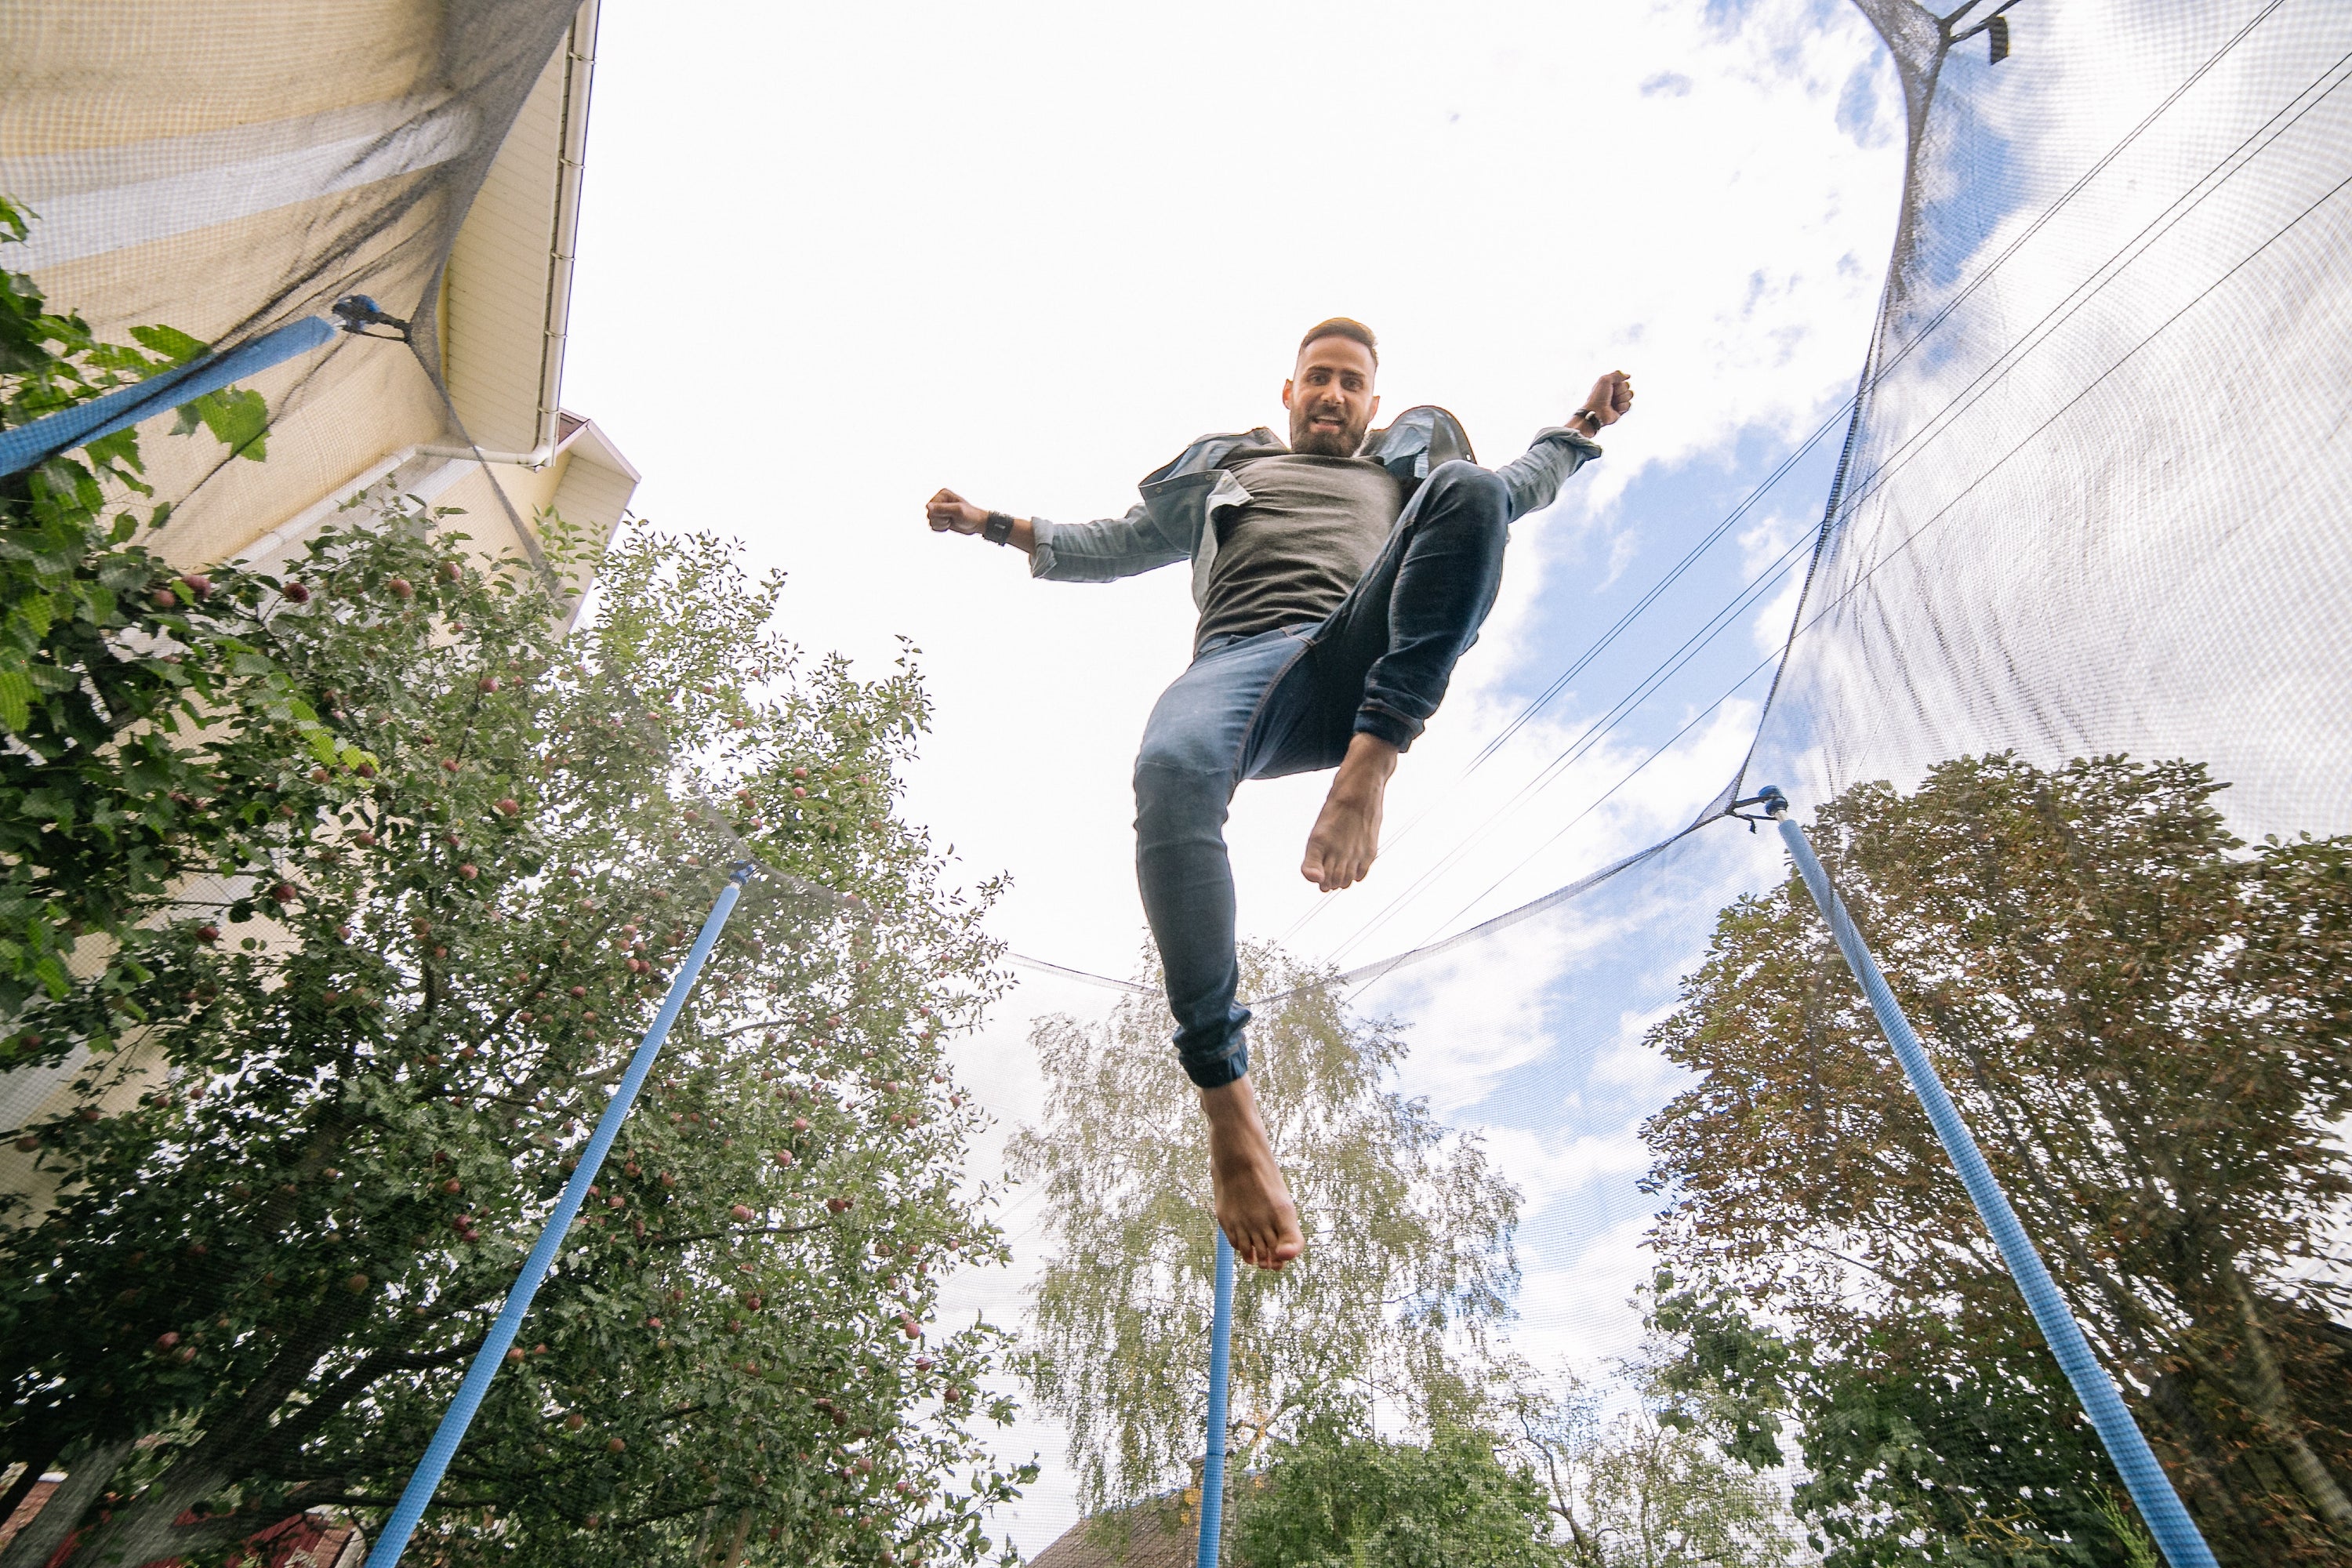 Creative and fun ways to use a trampoline, such as trampoline yoga, games, and acrobatics